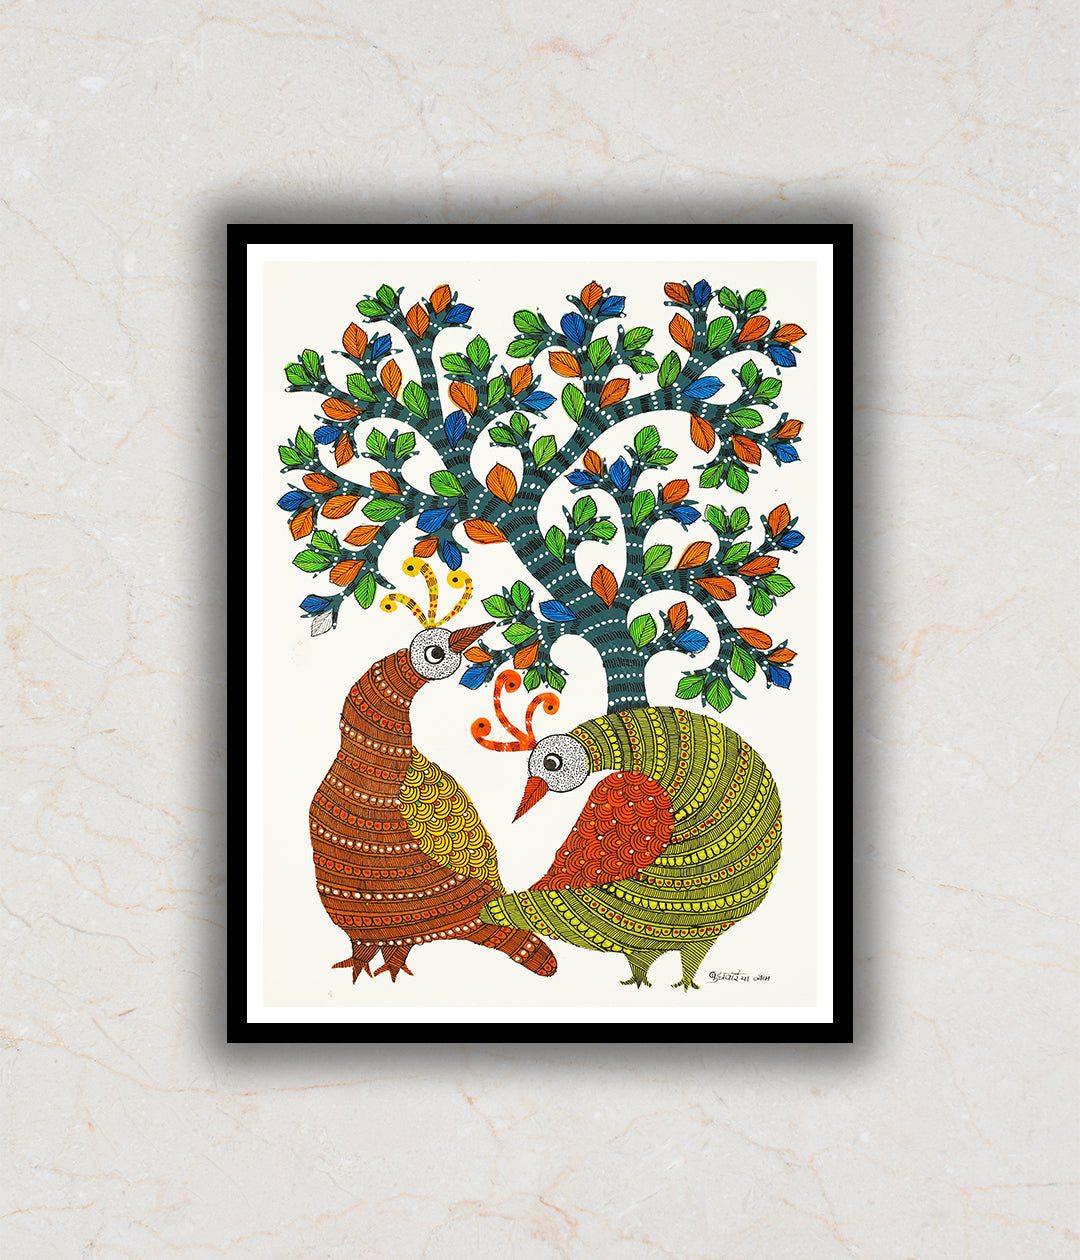 The Peacock and the Tree Gond Art Painting For Home Wall Art Decor